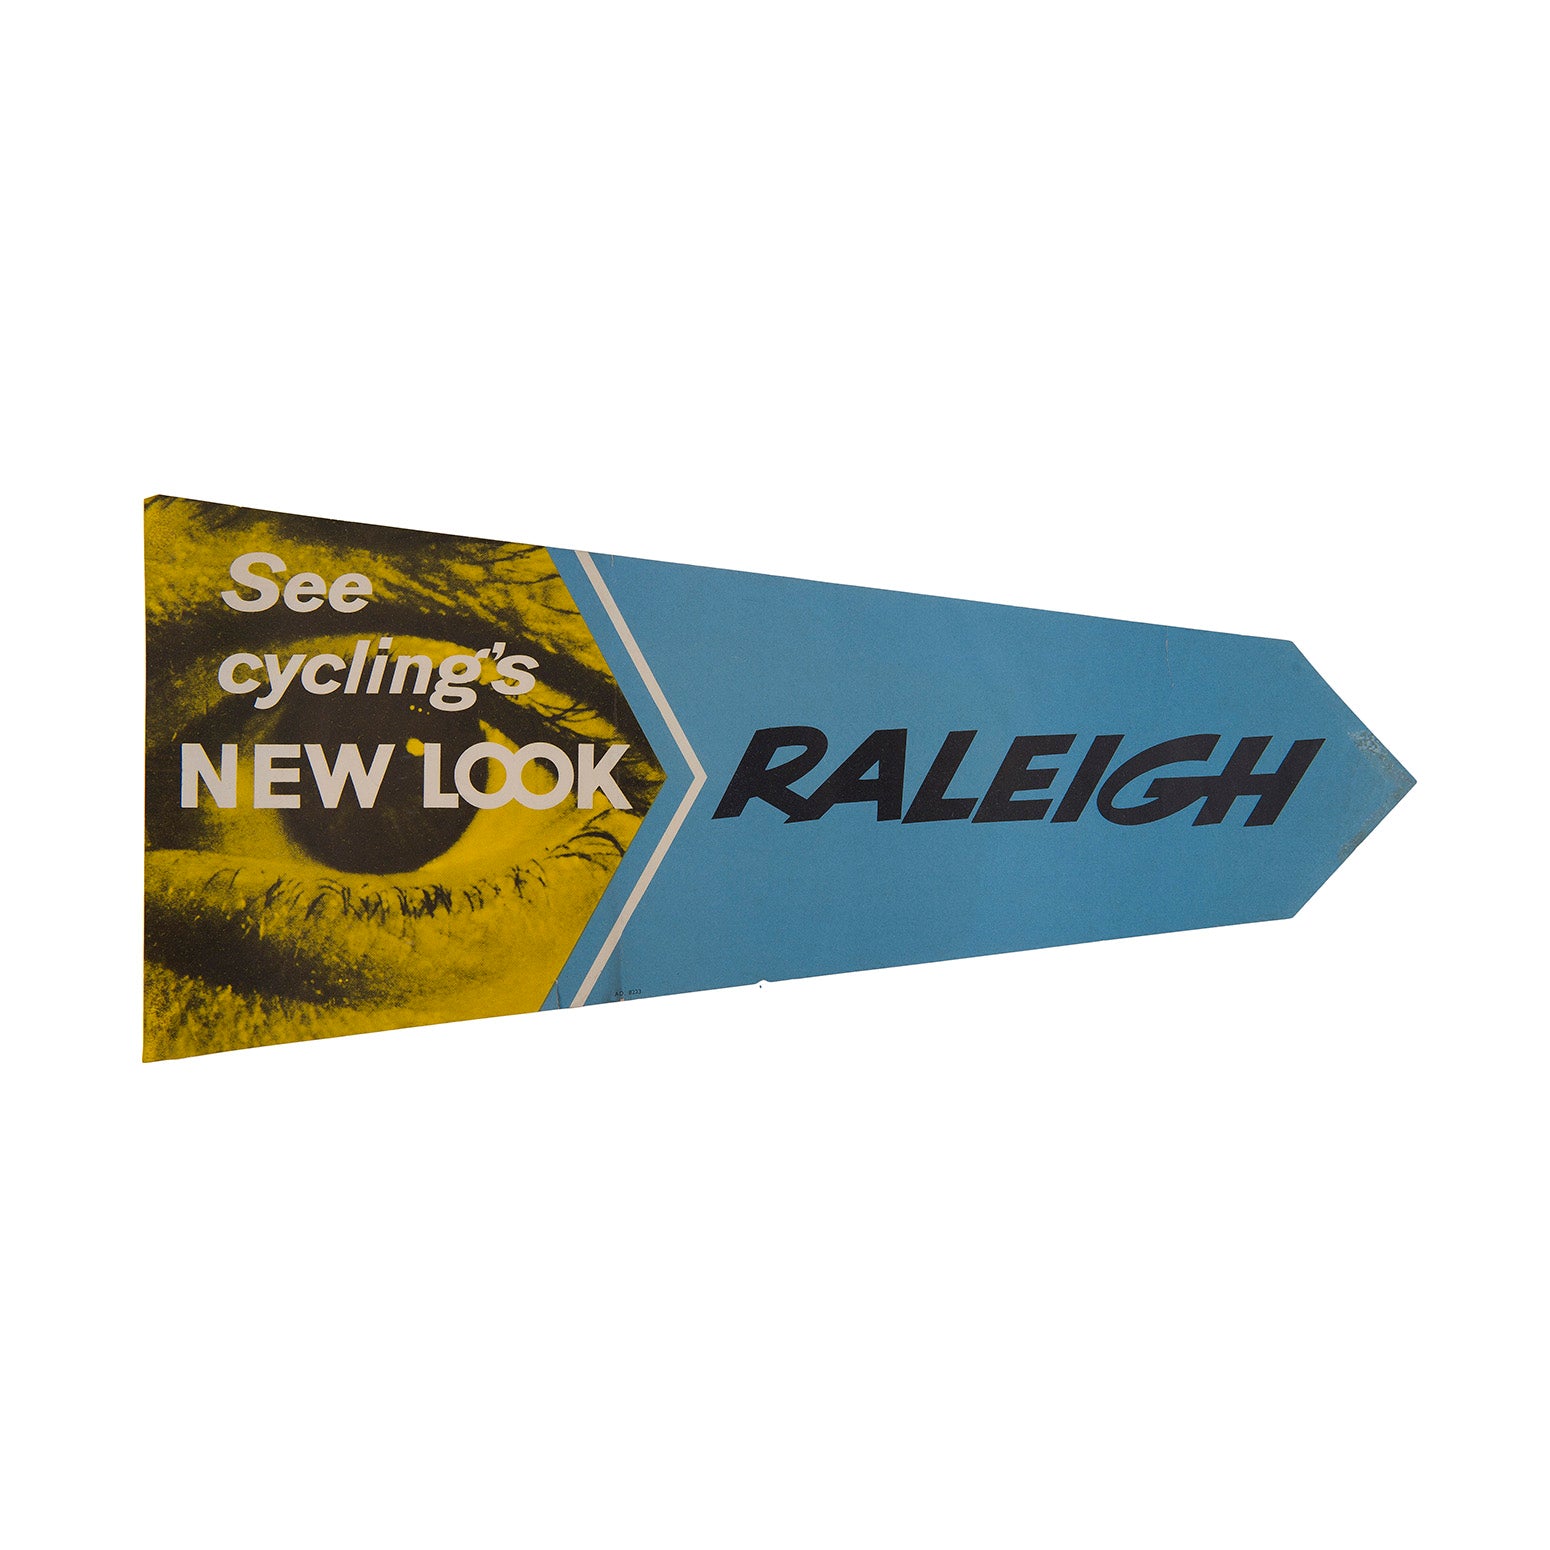 Raleigh. See cycling's New Look